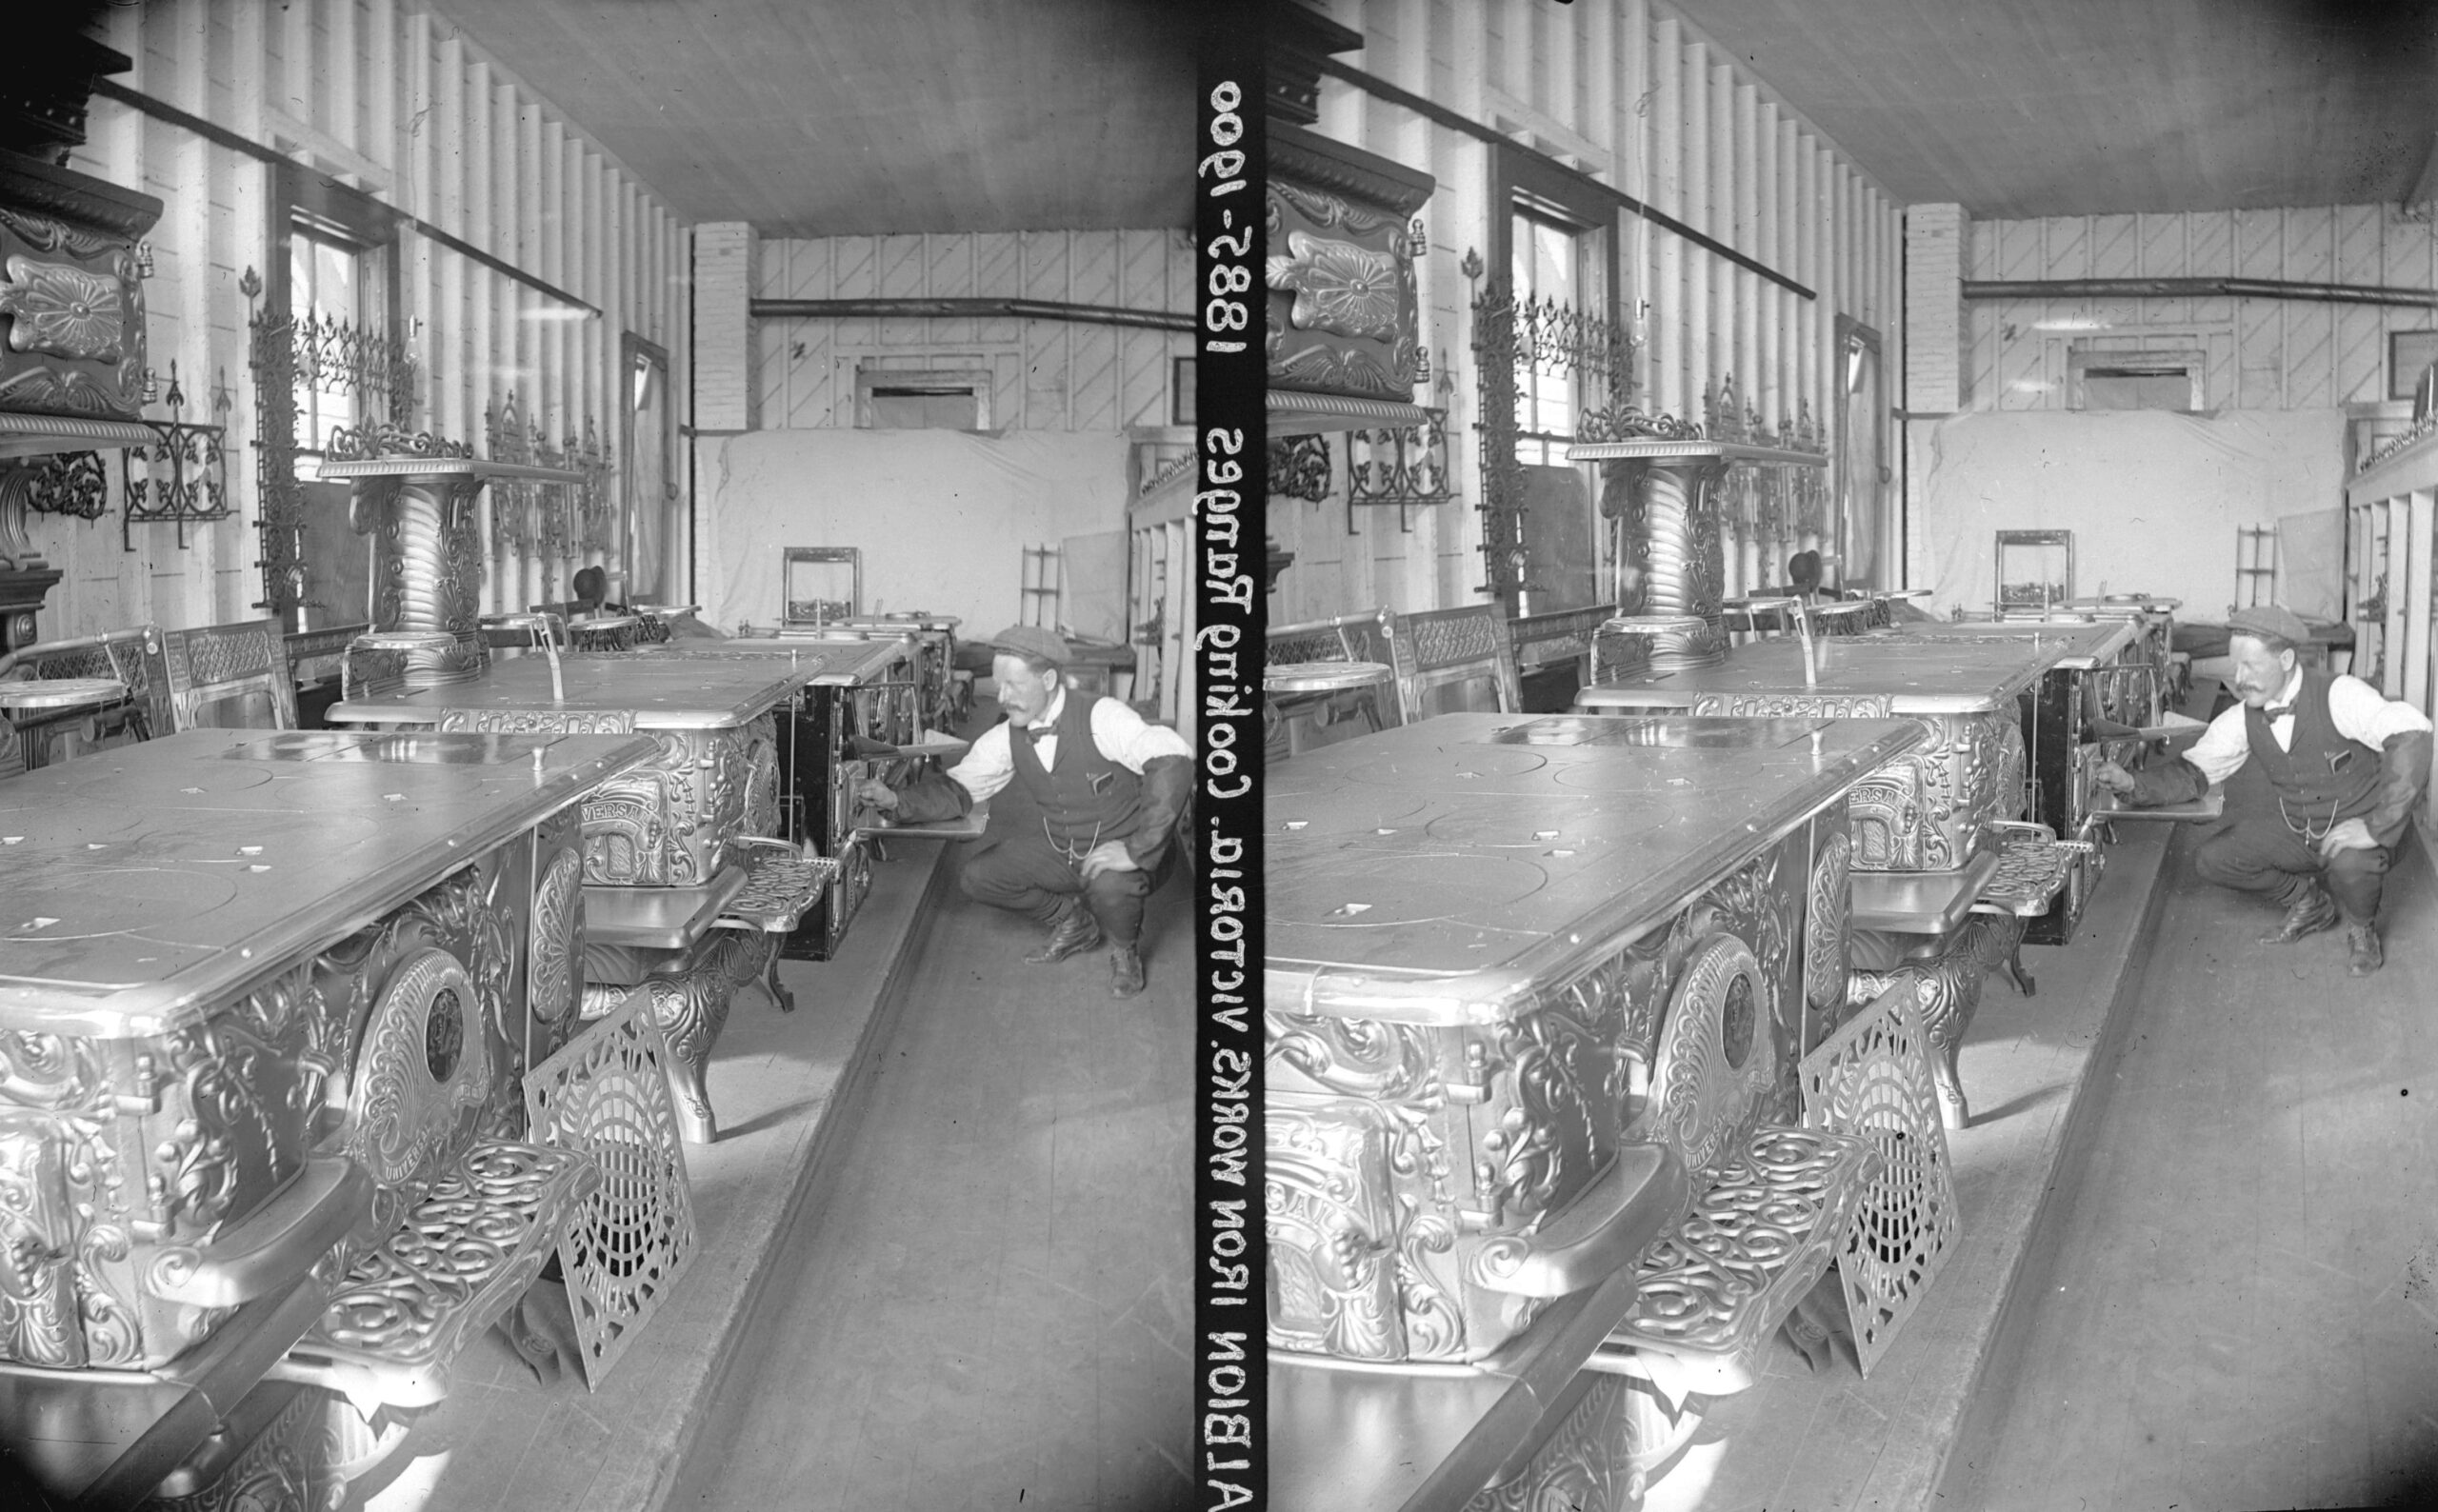 Digital reproduction of the glass plate negative. Albion Iron Works cooking ranges, ca. 1895. This is example of a pair that when printed, the images would need to be switched in order to be viewed properly in a stereo viewer. Reference code: AM1376-: CVA 137-142